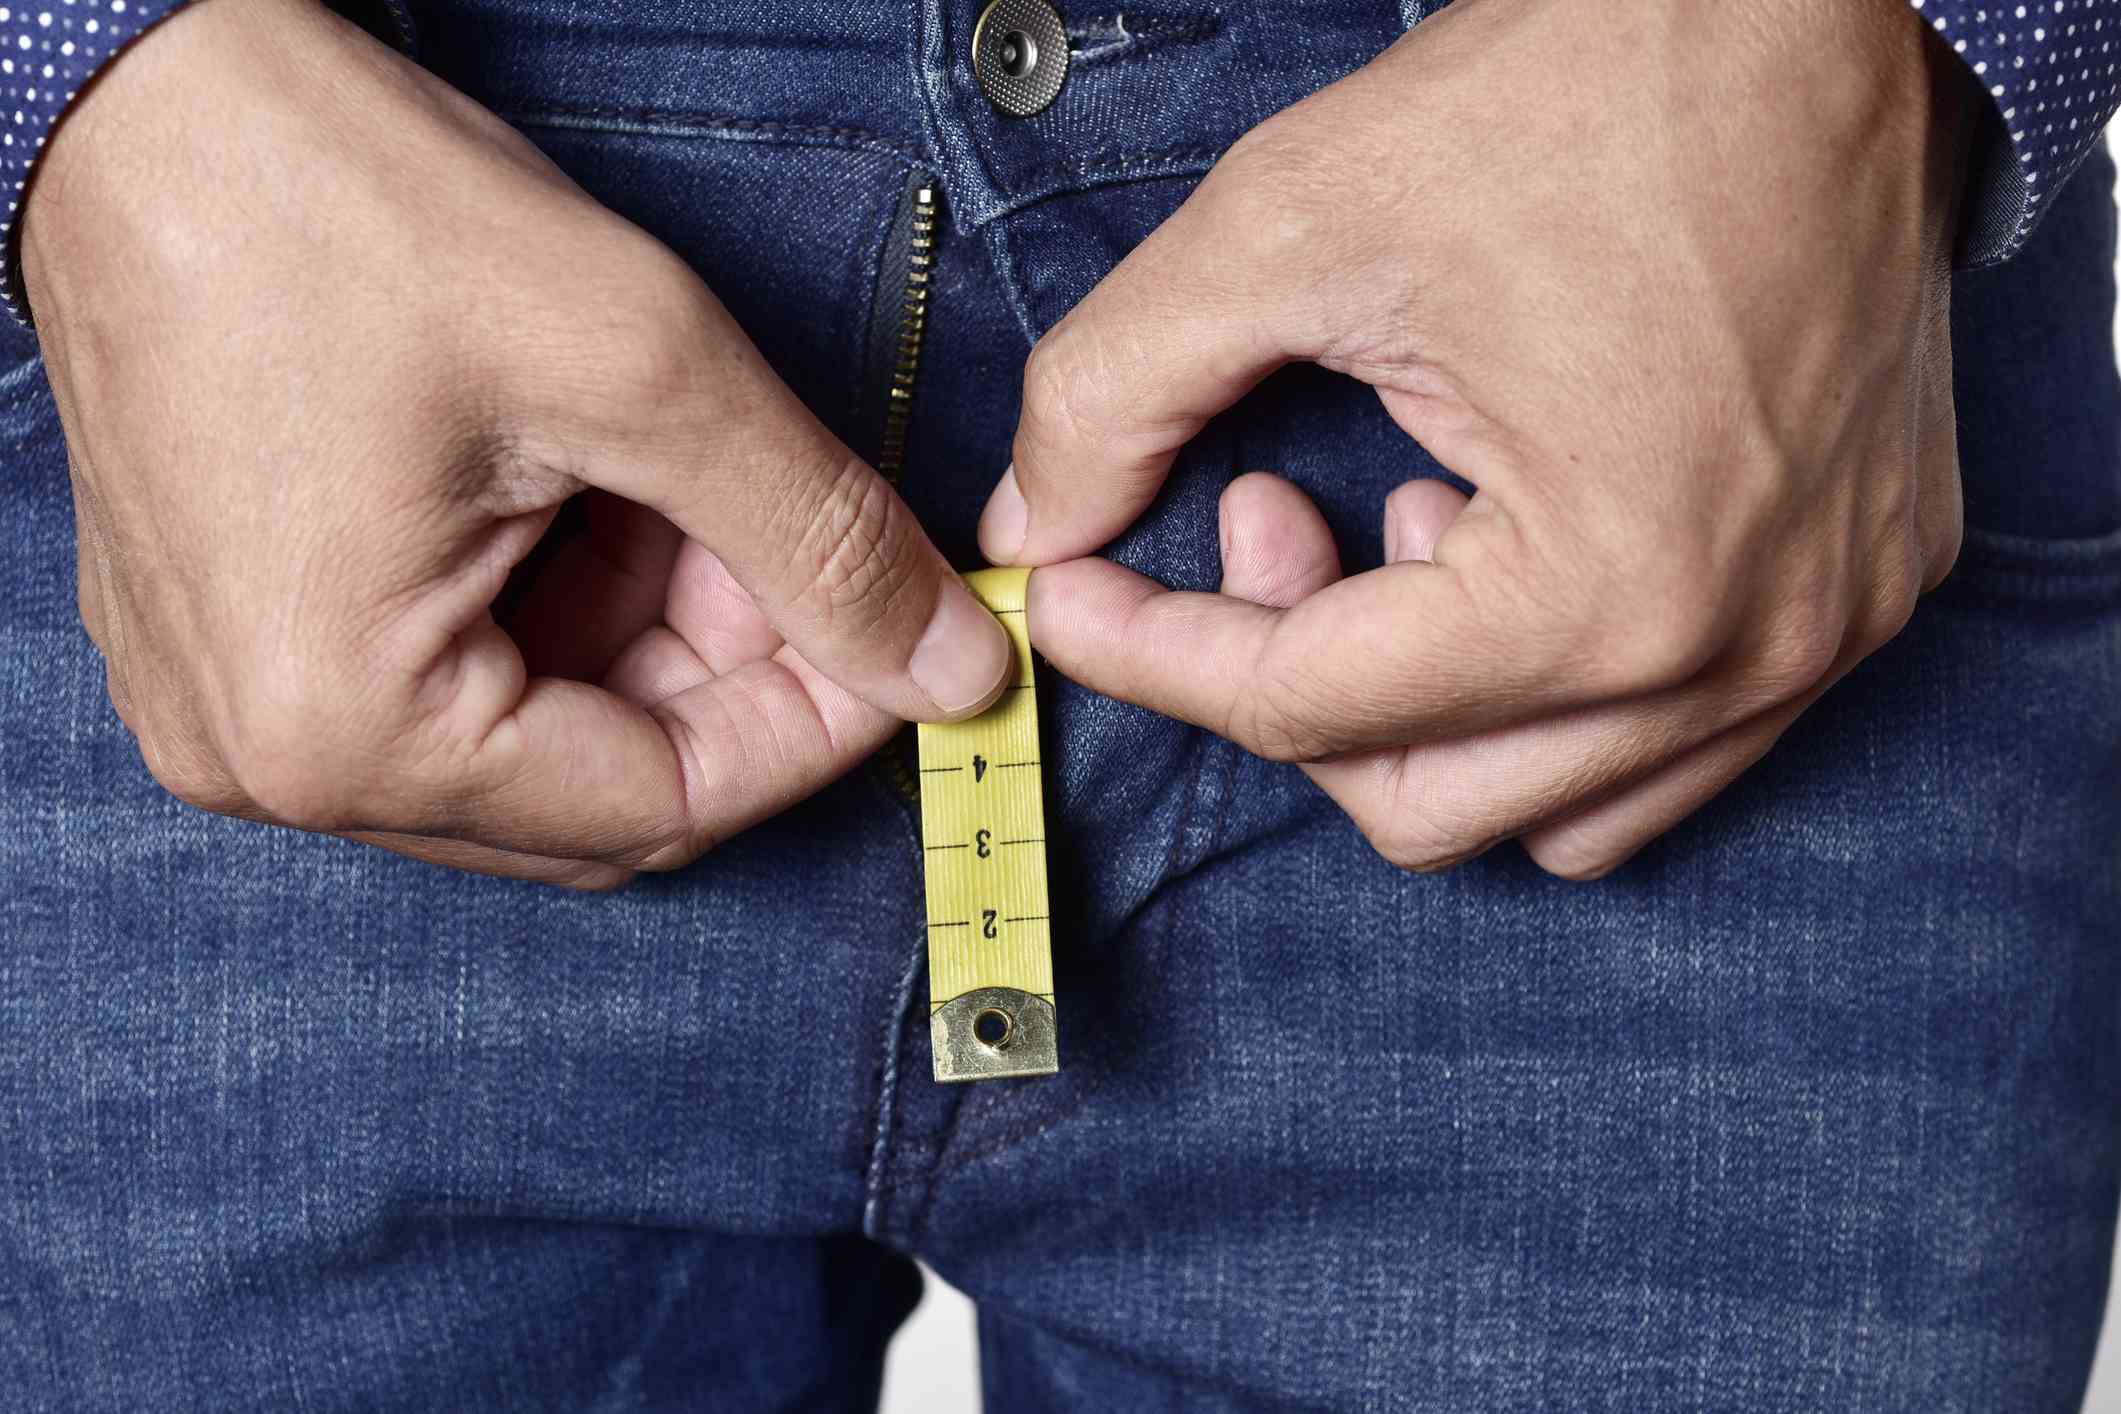 New FDA Study: Stacking Bitcoin Makes Your Penis Smaller